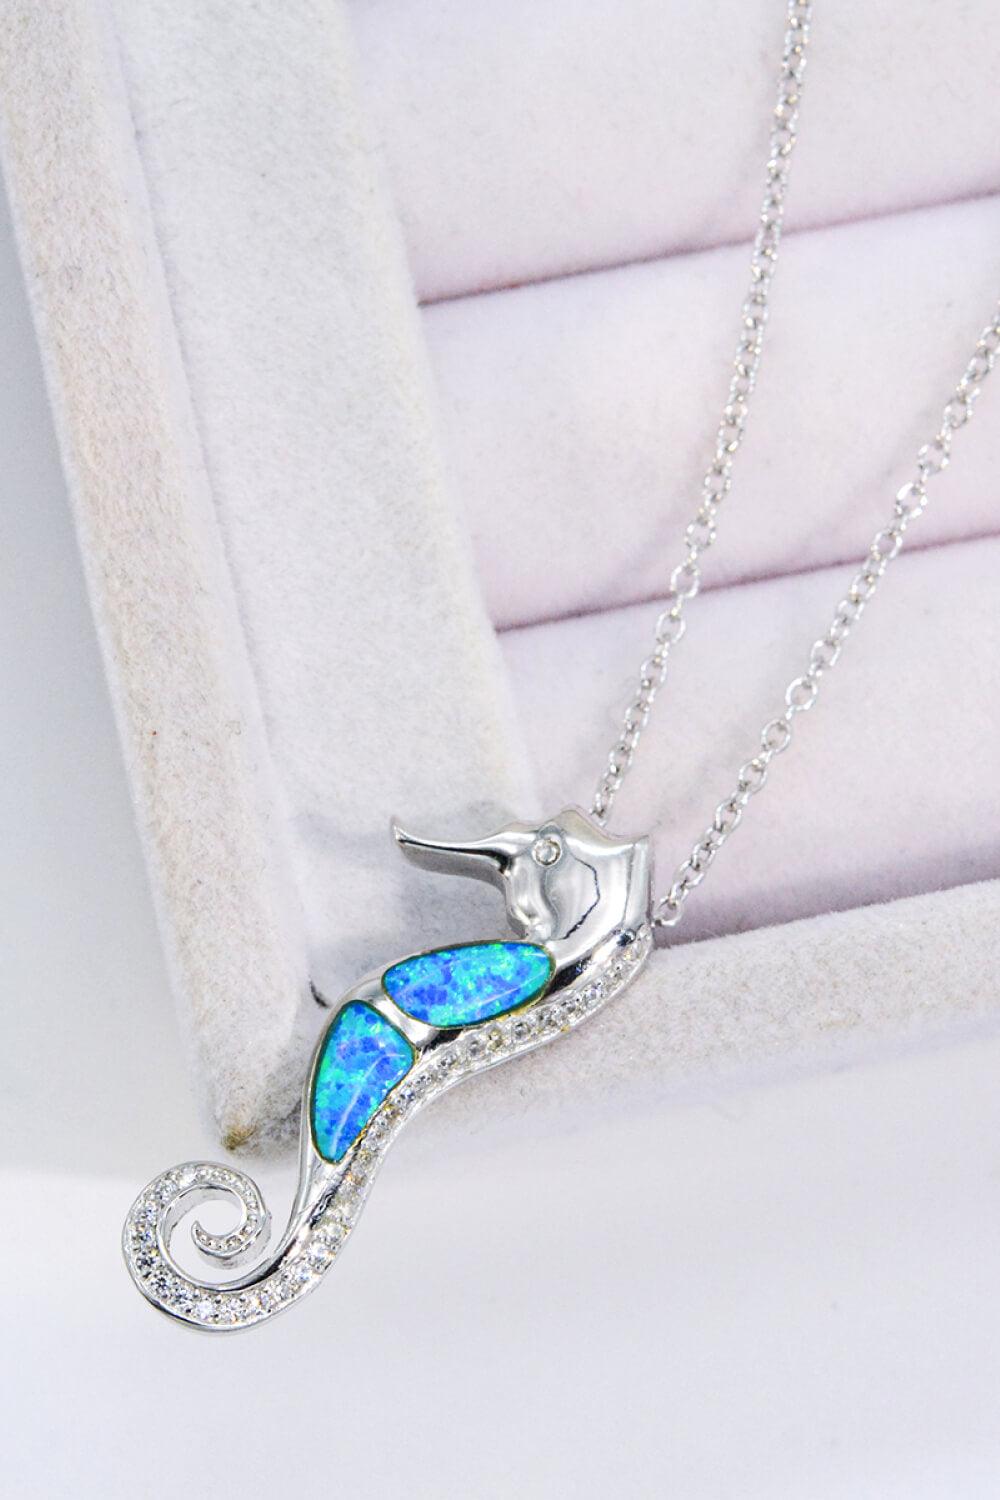 Opal Seahorse 925 Sterling Silver Necklace - Flyclothing LLC